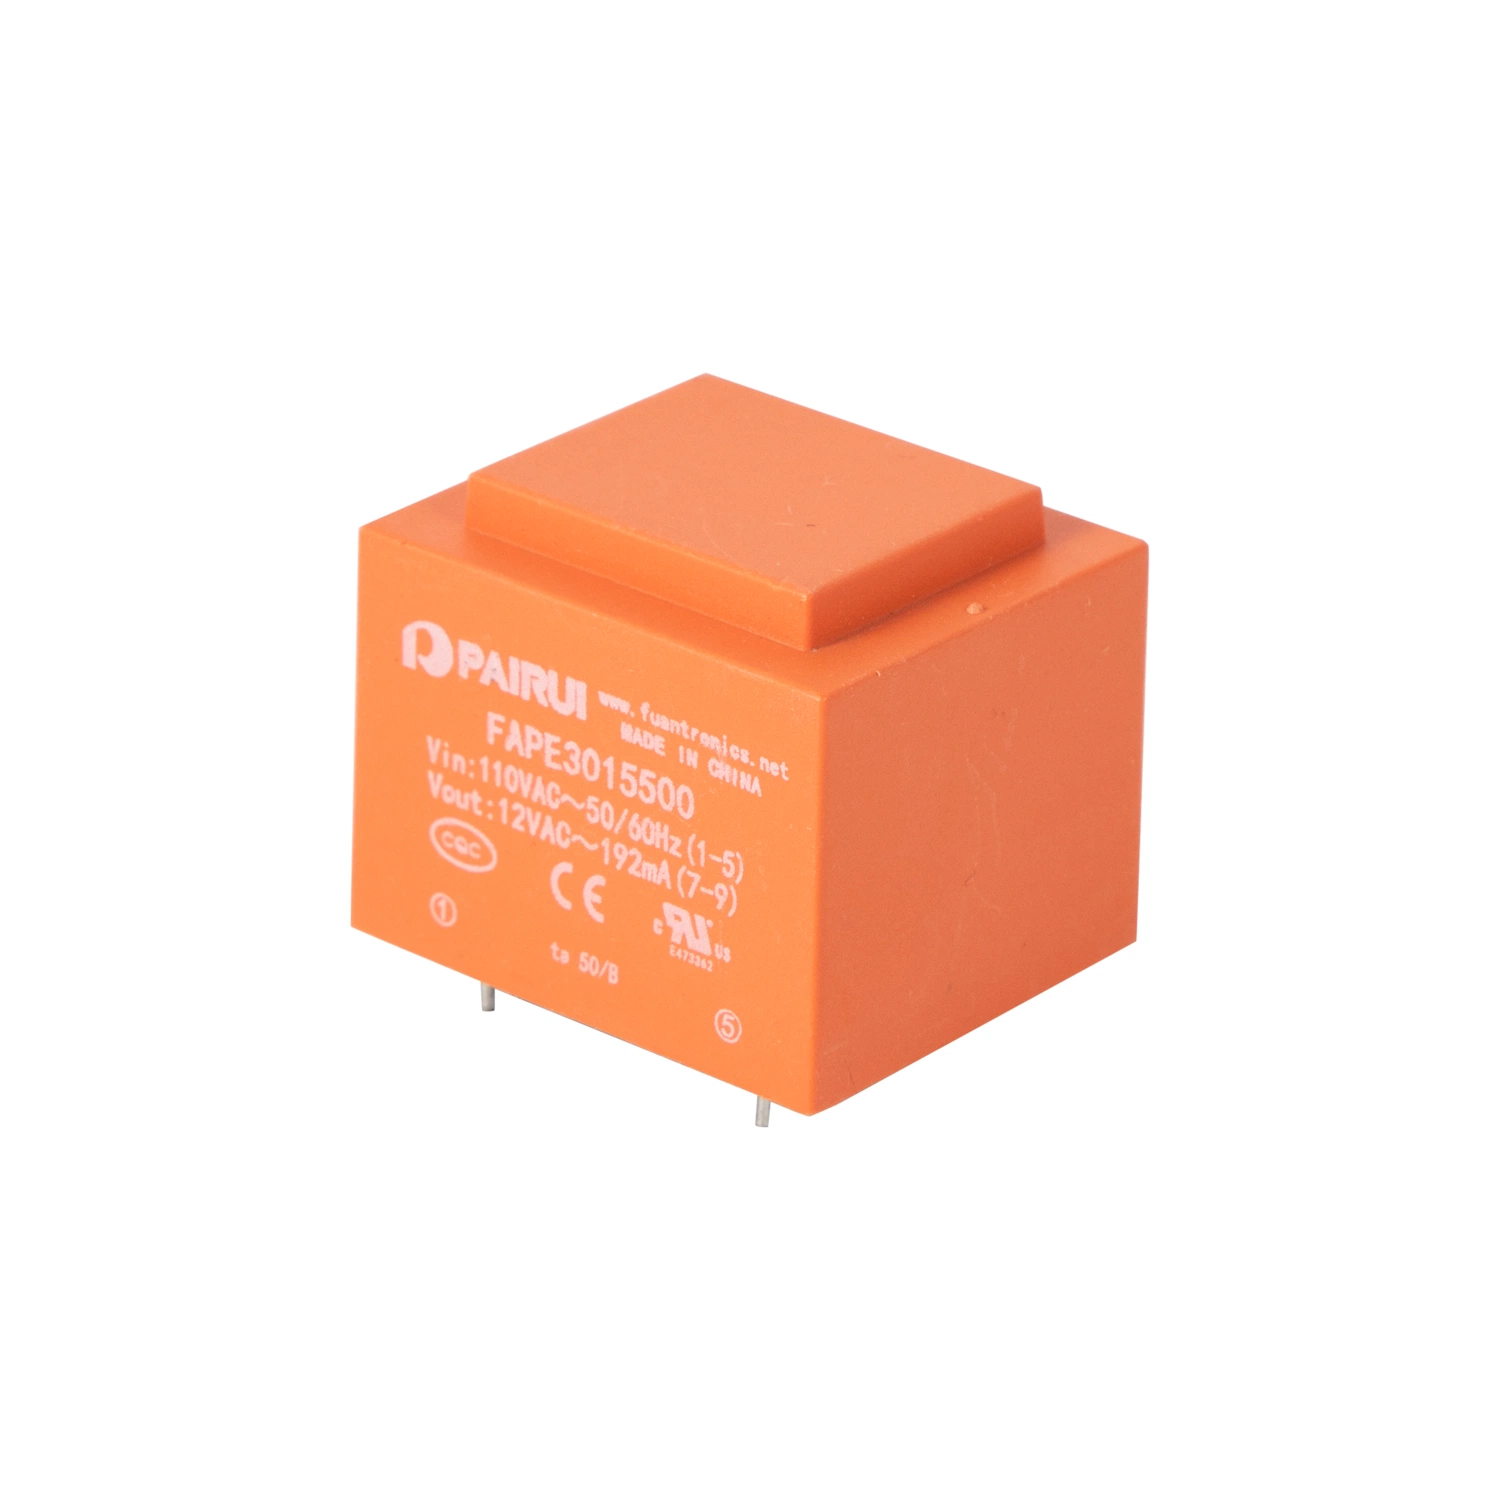 Widely Used Encapsulated Transformer with High quality/High cost performance for Consumer Electronics/Smart Home/Medical Equipments/Industrial Equipments